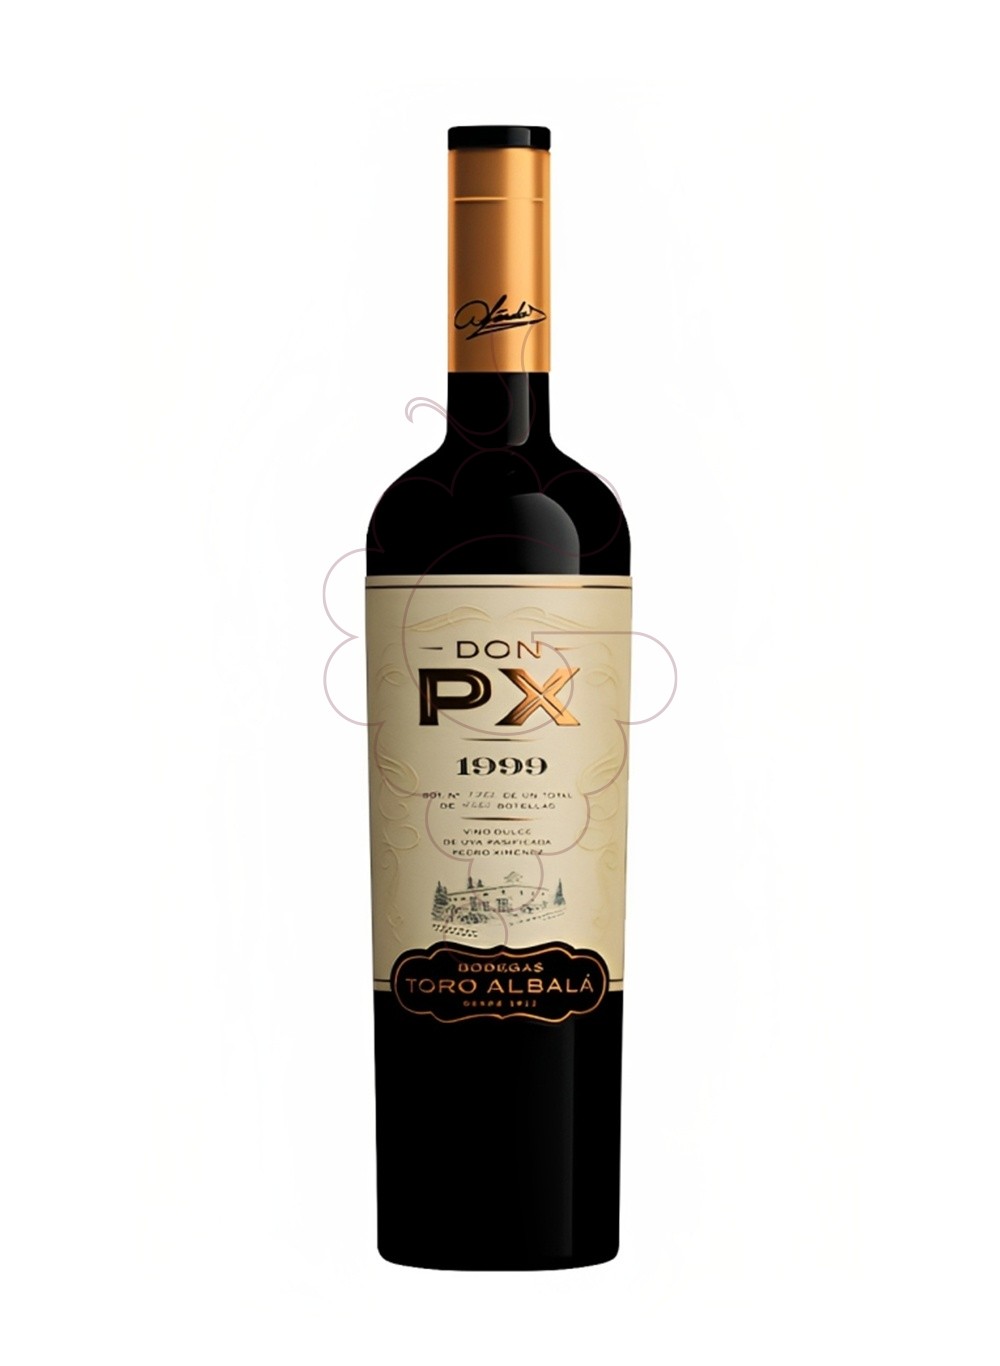 Photo Don PX Gran Reserva fortified wine